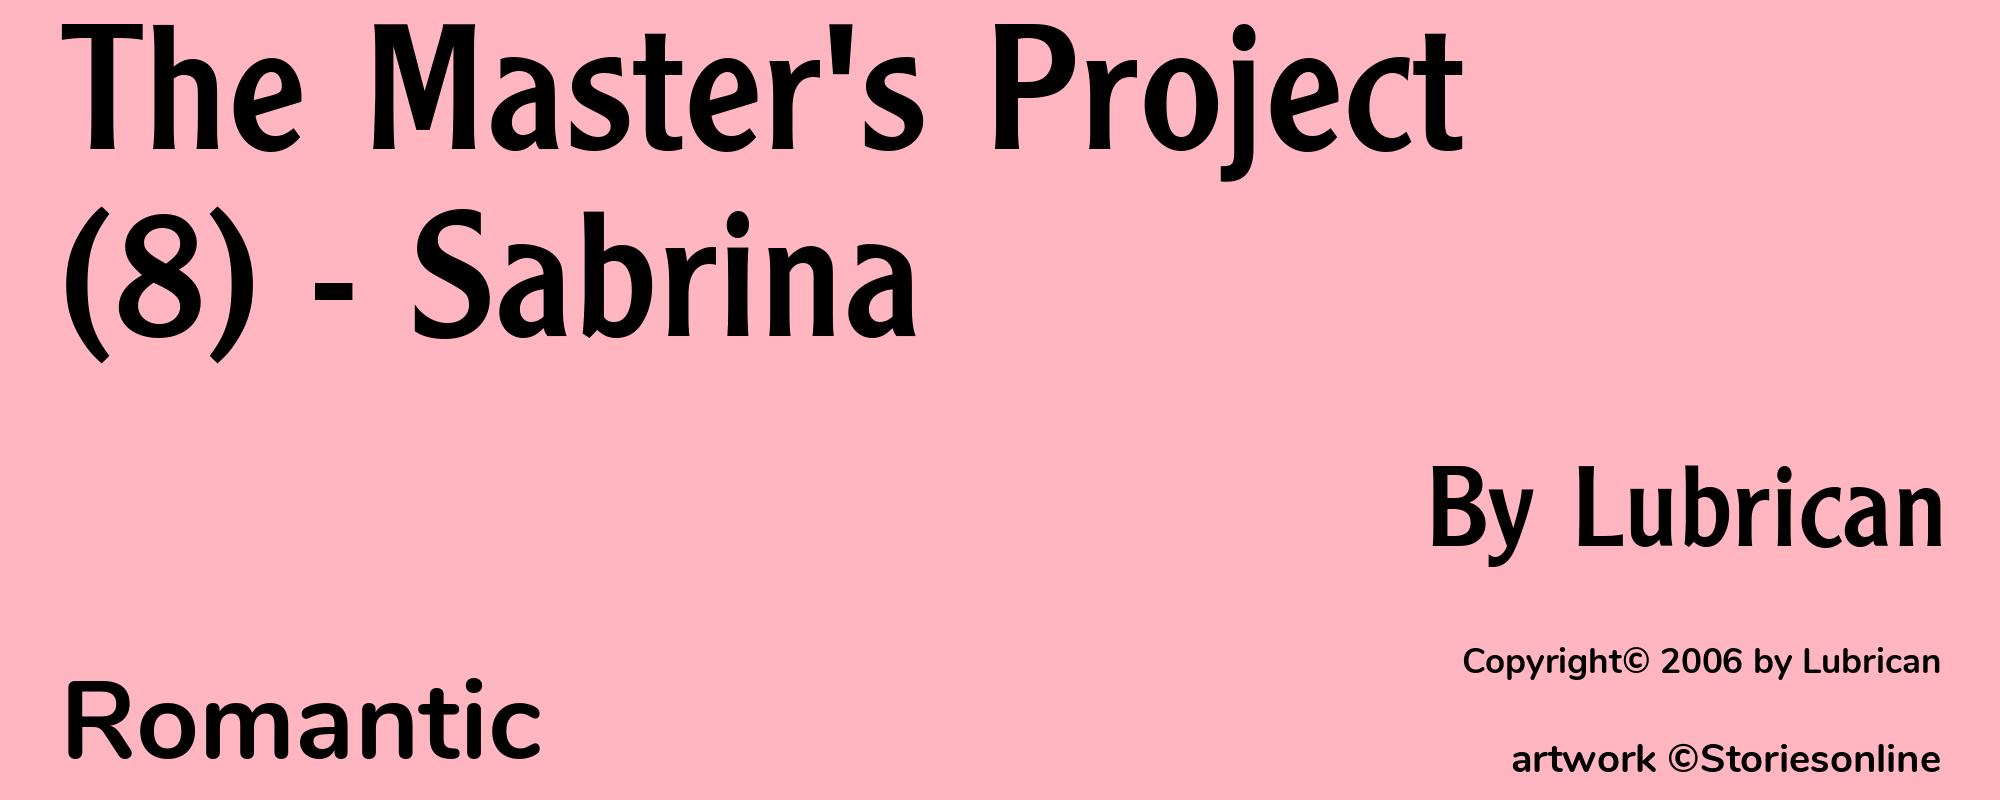 The Master's Project (8) - Sabrina - Cover